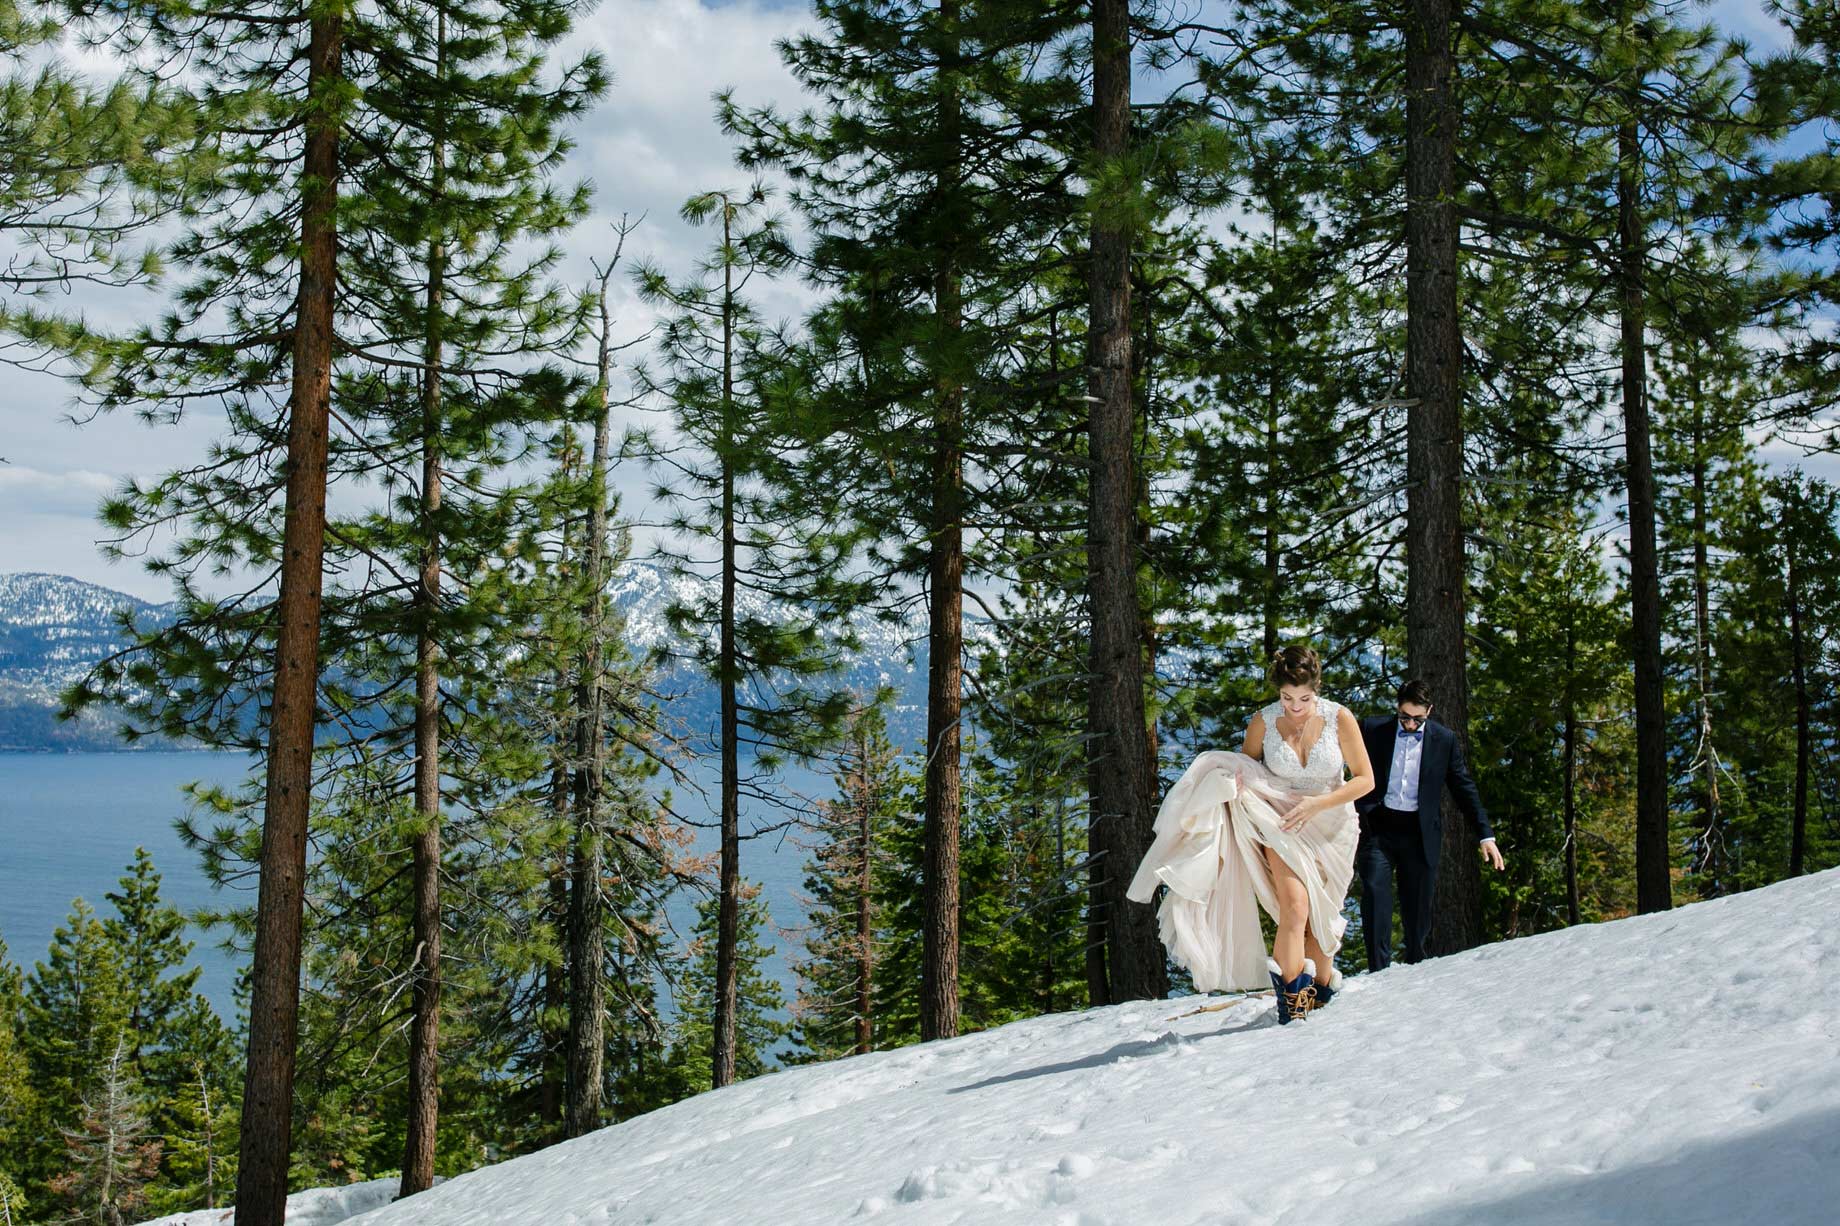 Now is the time to plan a Lake Tahoe adventure wedding!